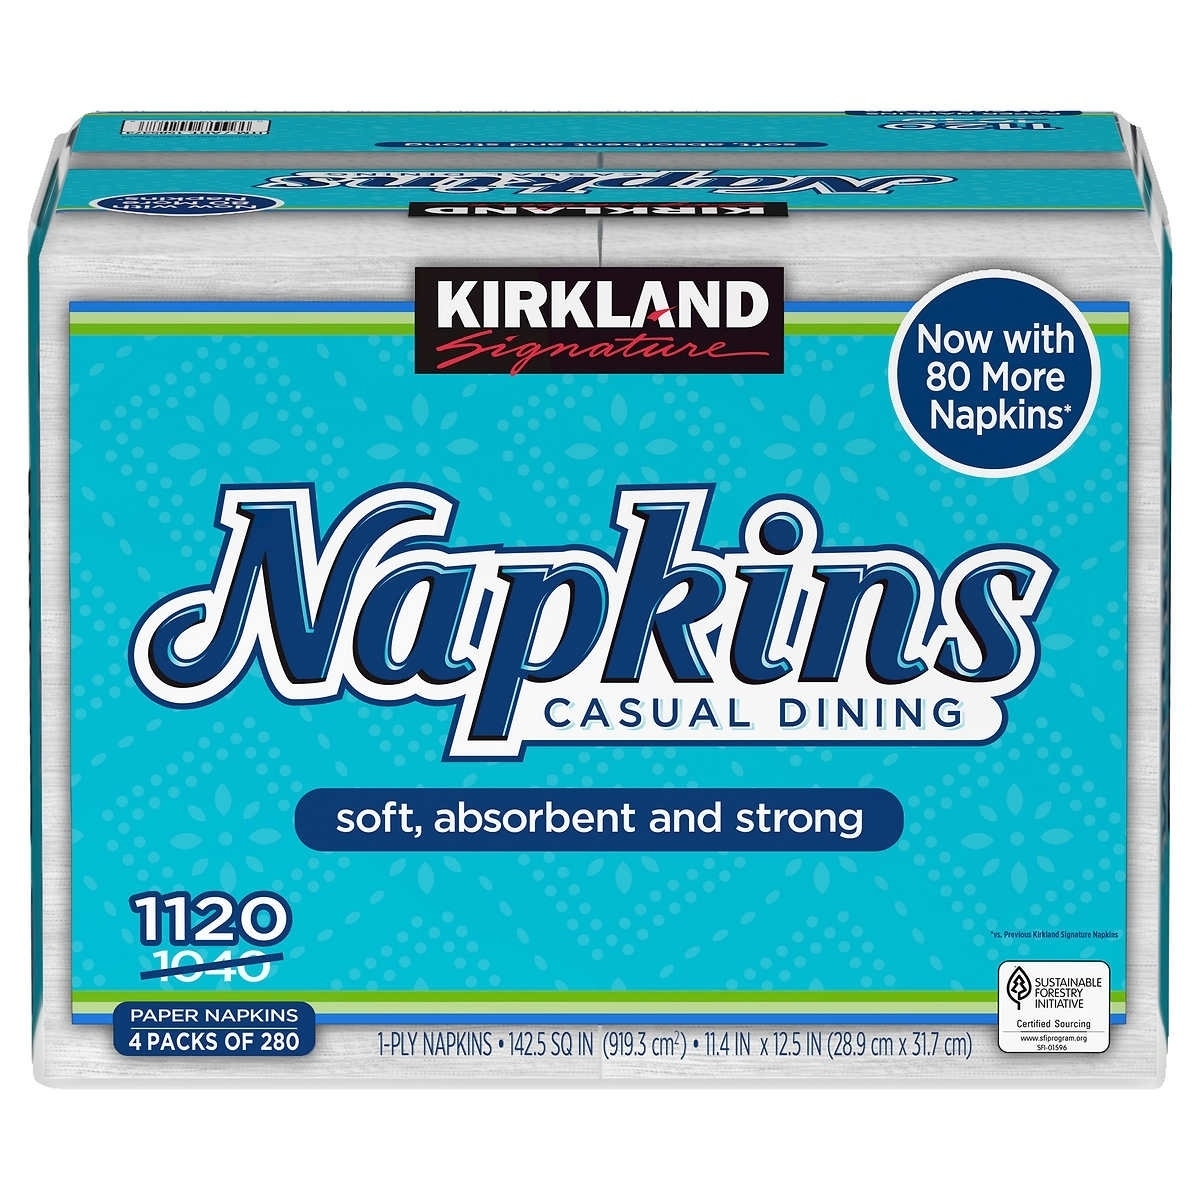 Kirkland Signature Napkin, 1-Ply, 280 Count (Pack Of 4)